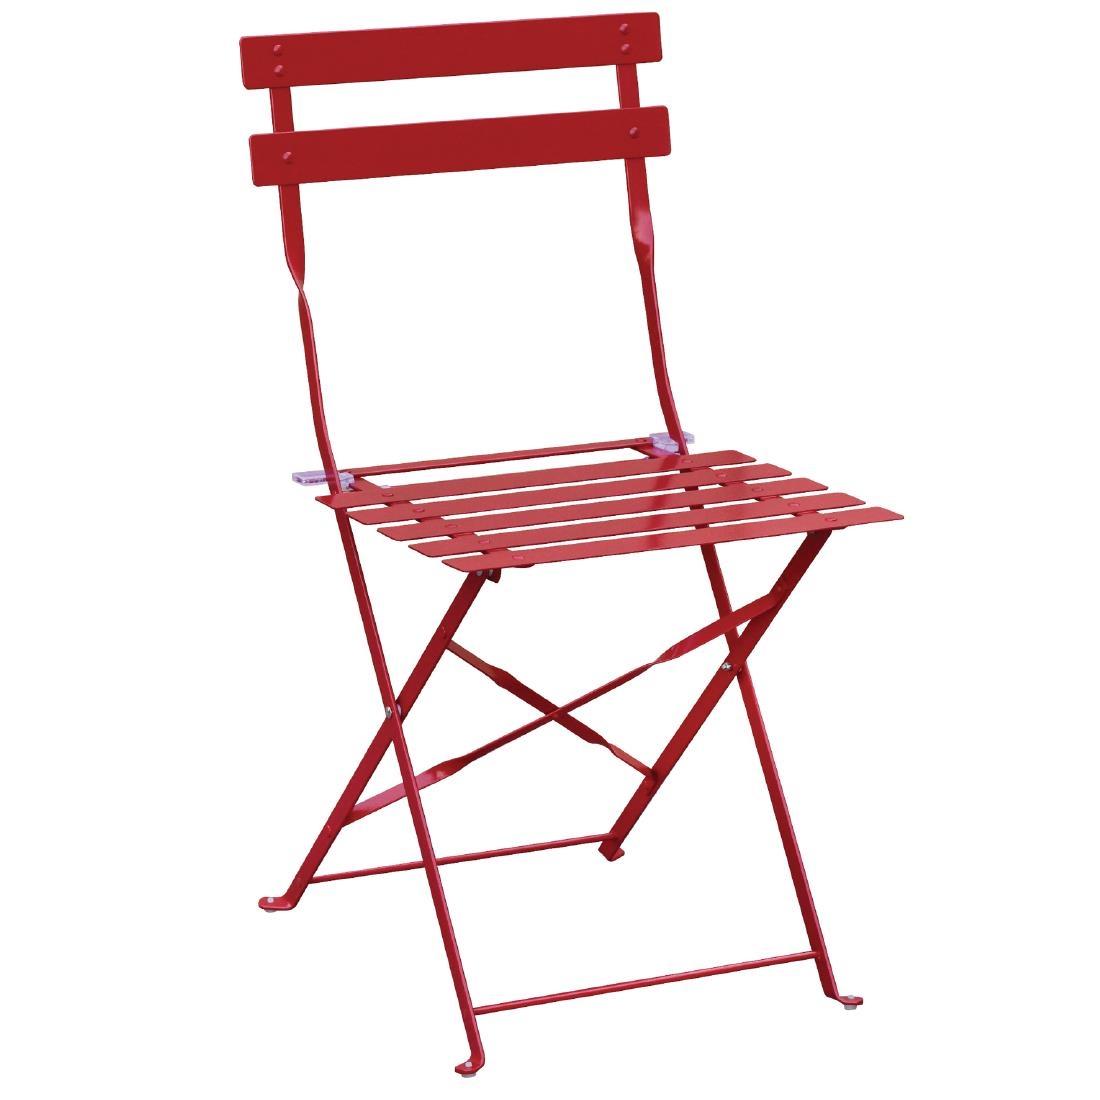 Bolero Red Pavement Style Steel Chairs (Pack of 2) - GH555  - 1